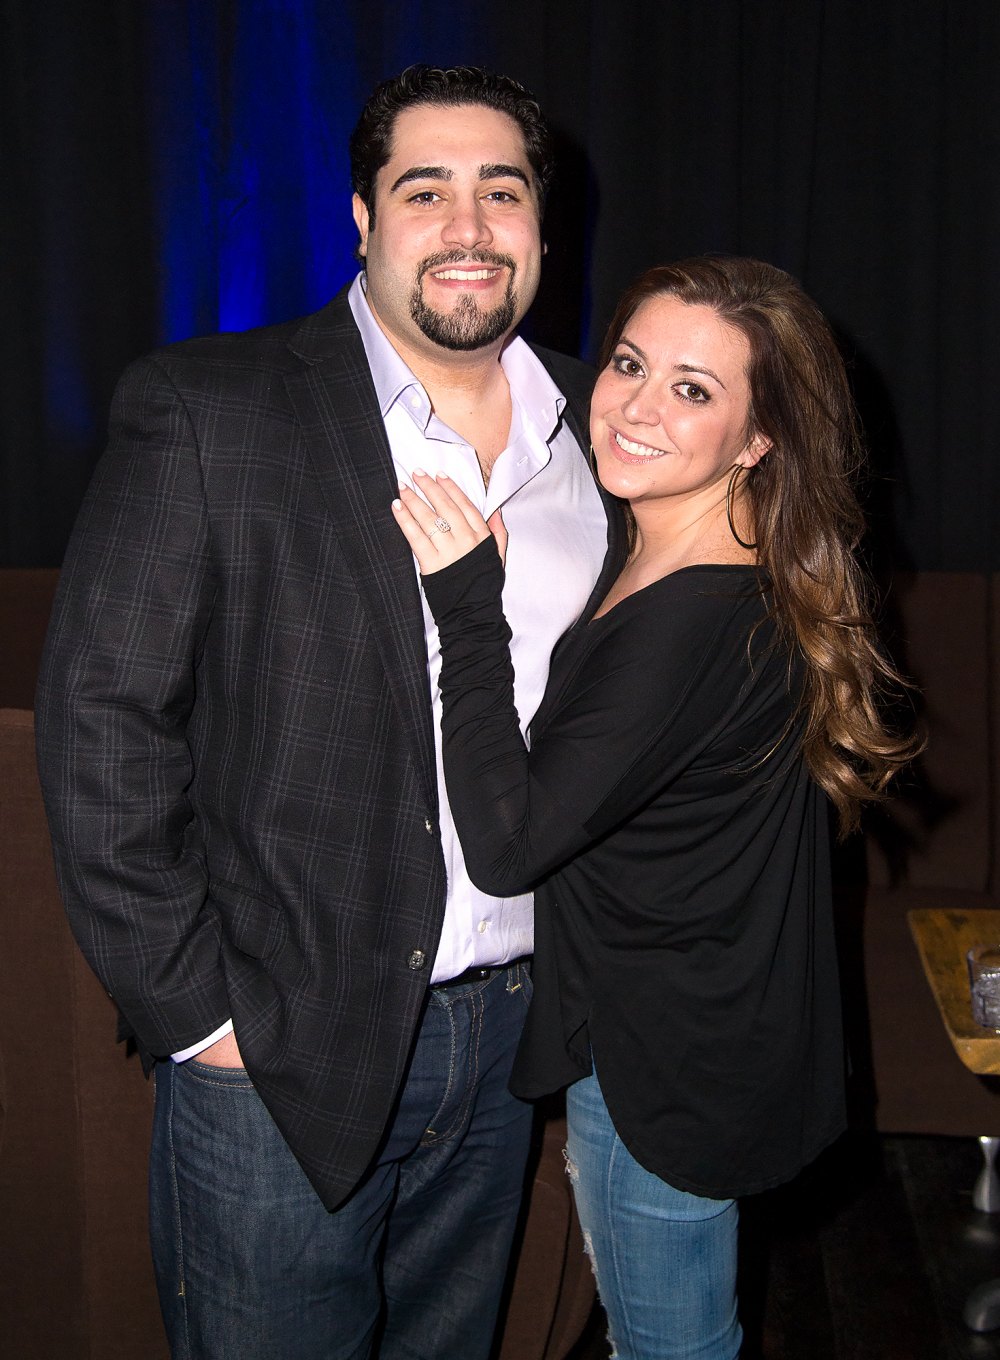 RHONJ’s Lauren Manzo and Vito Scalia’s Relationship Timeline: The Way They Were